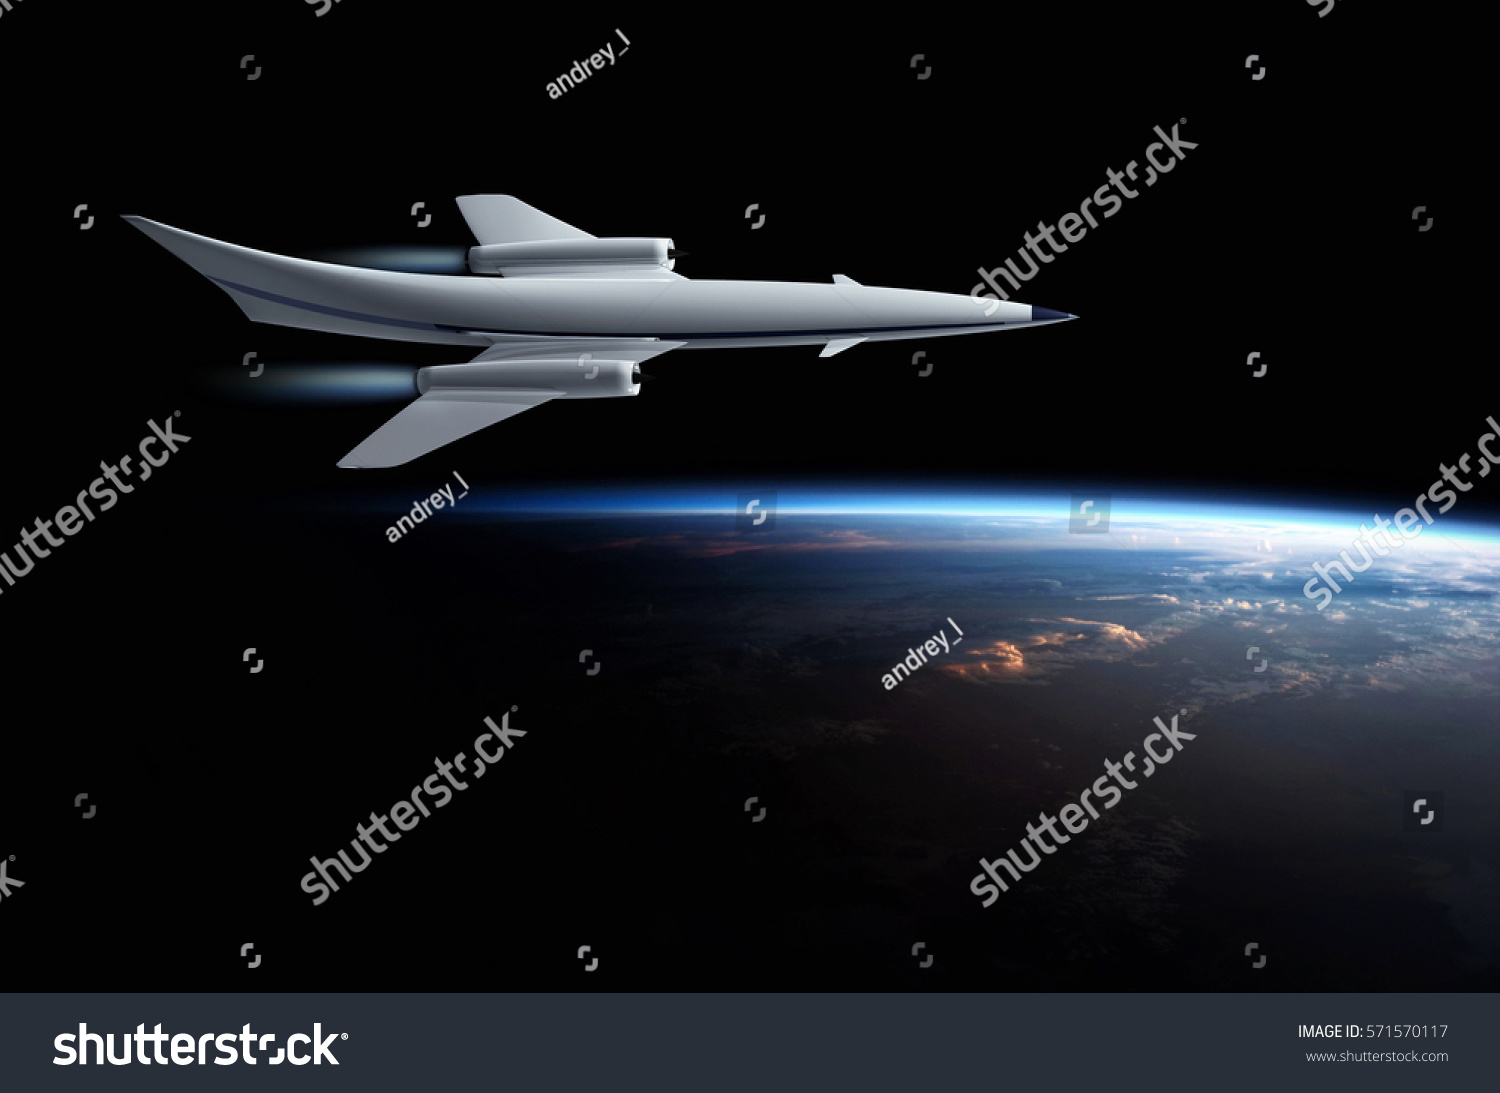 Concept Futuristic Hypersonic Passenger Aircraft Flying